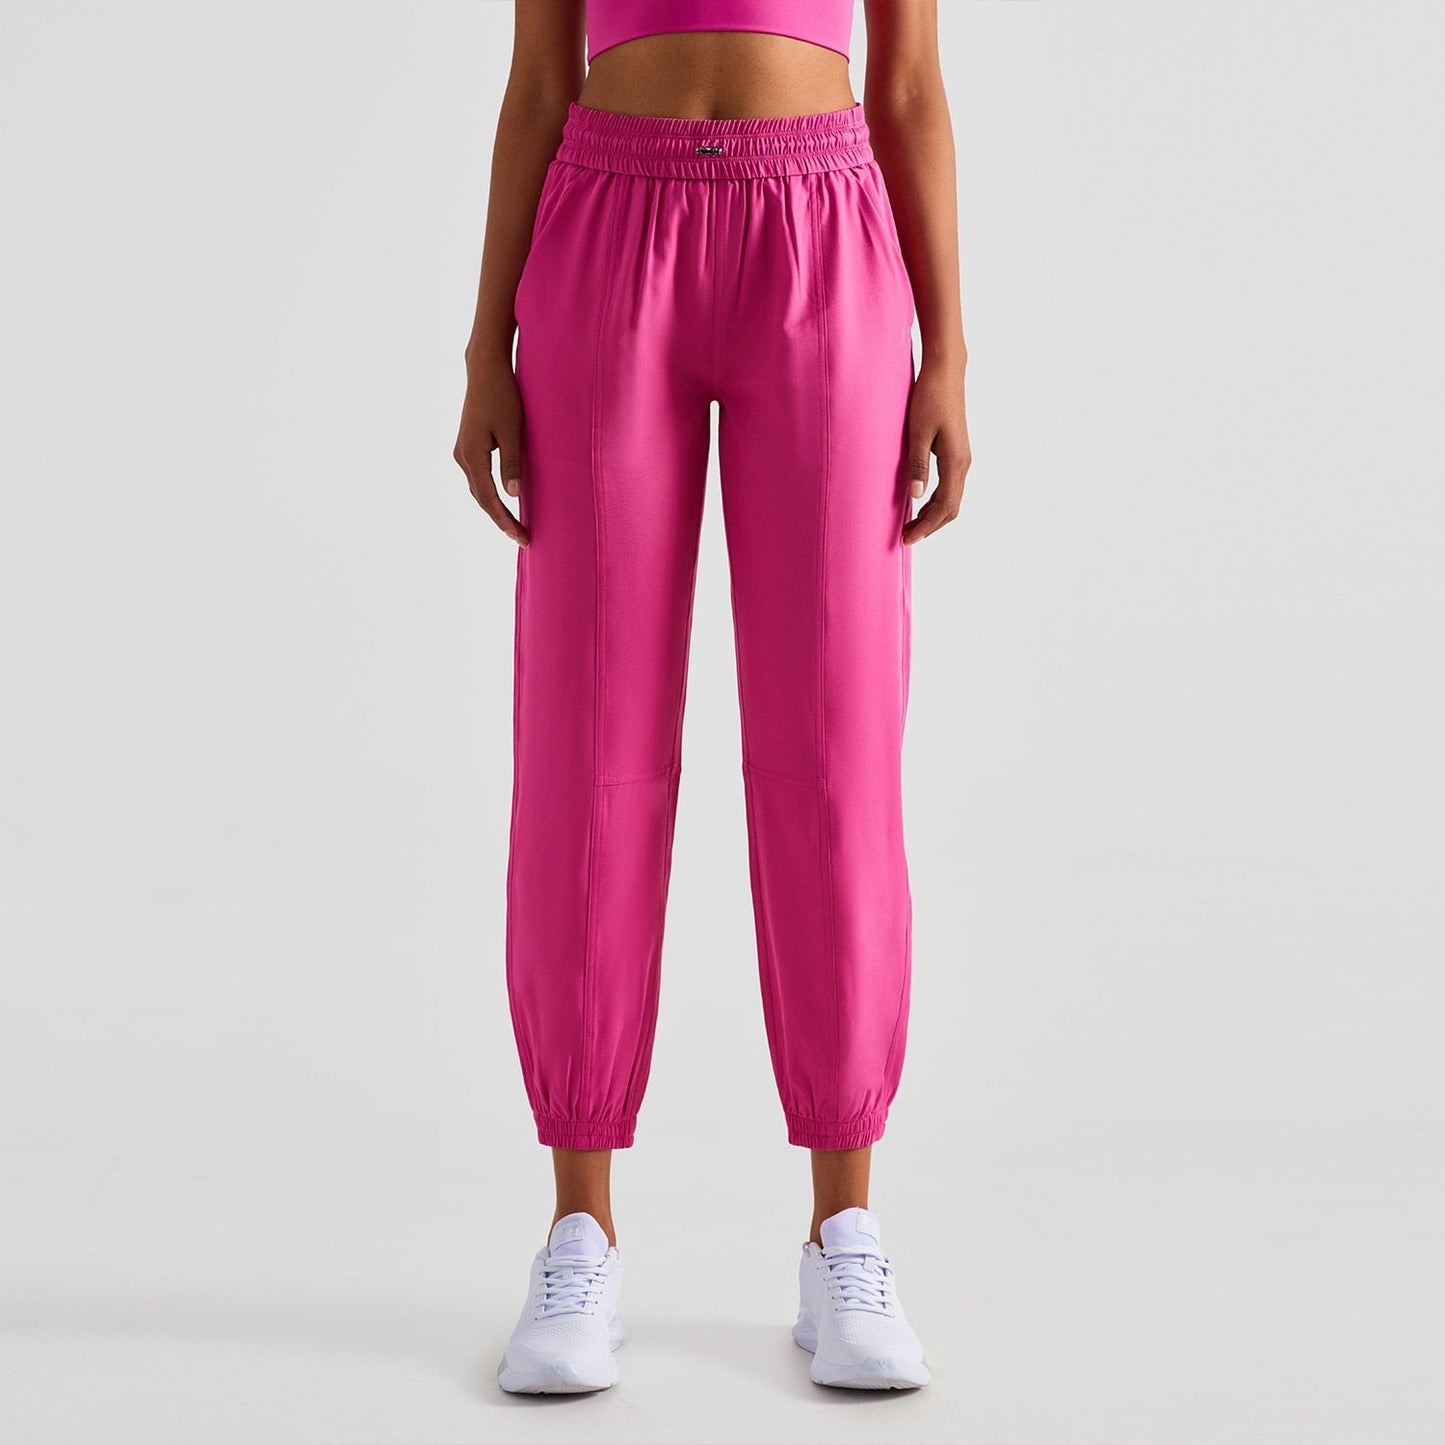 LOOSE TRAINING TROUSERS - S / PINK